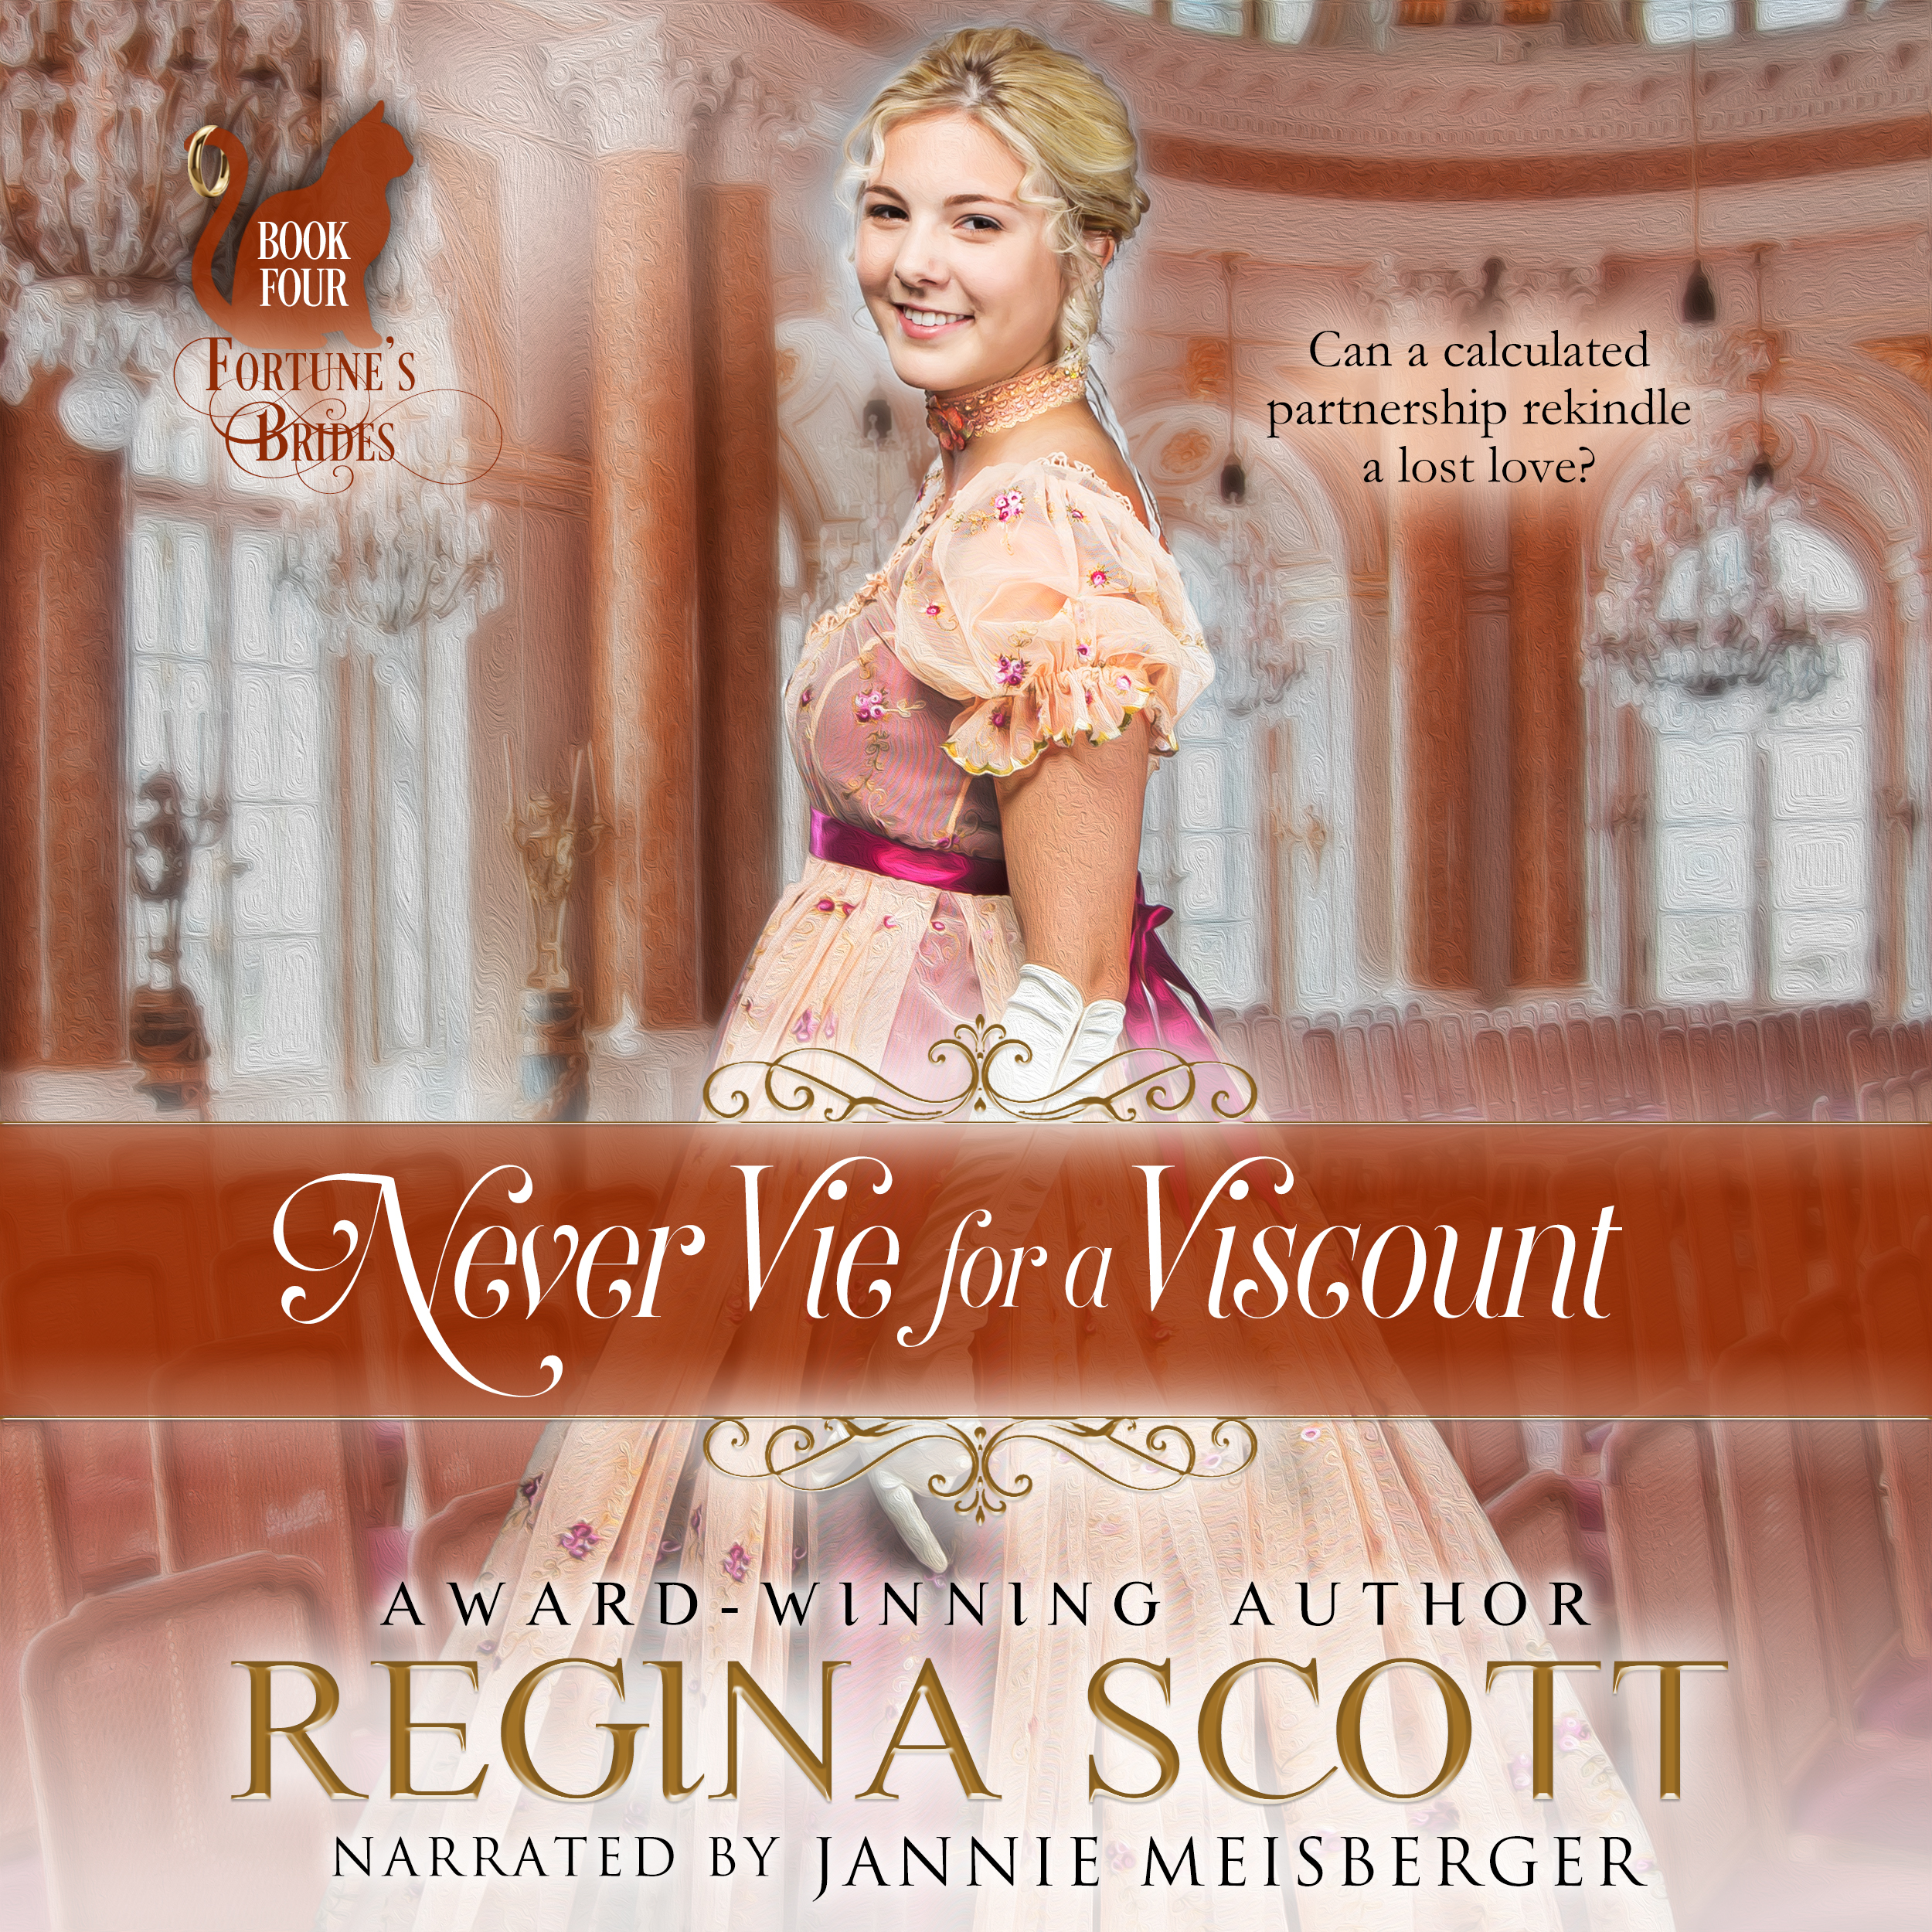 audio book for Never Vie for a Viscount by Regina Scott, book 4 in the Fortune's Brides series